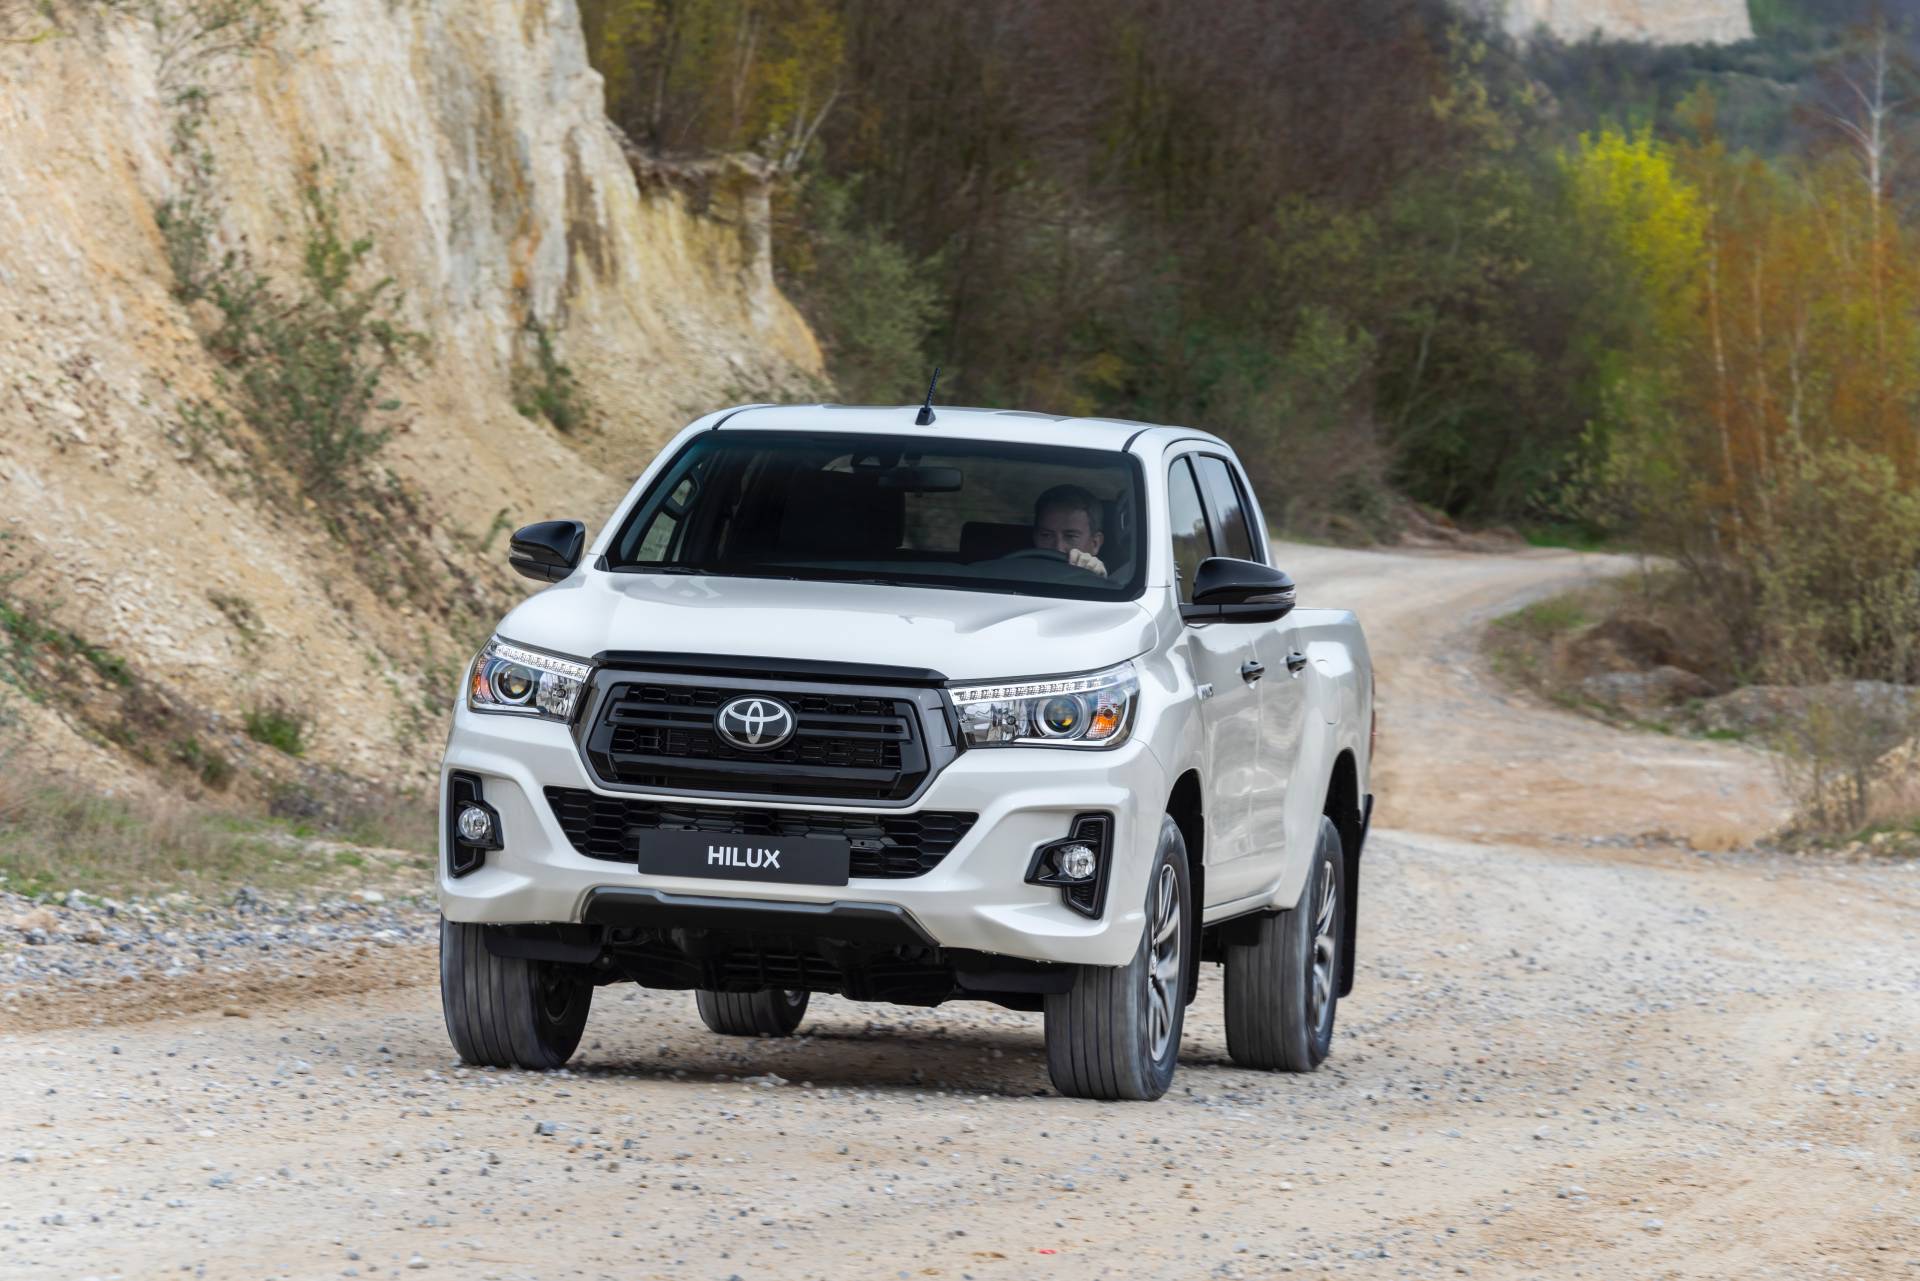 Toyota Wants To Make The Hilux A Lifestyle Choice With 2019 Special